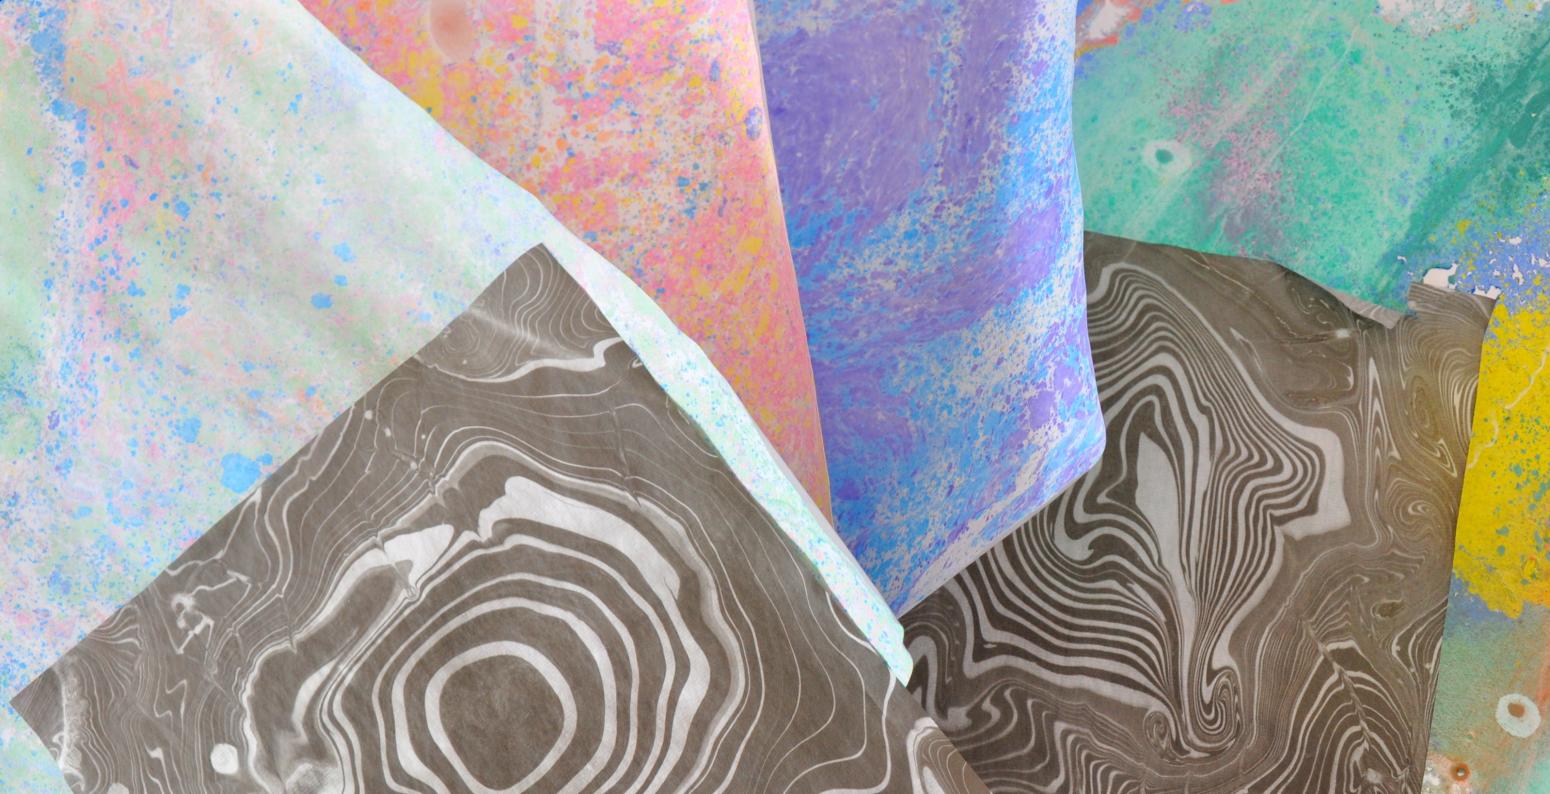 A pile of marbled papers of various colors and textures.